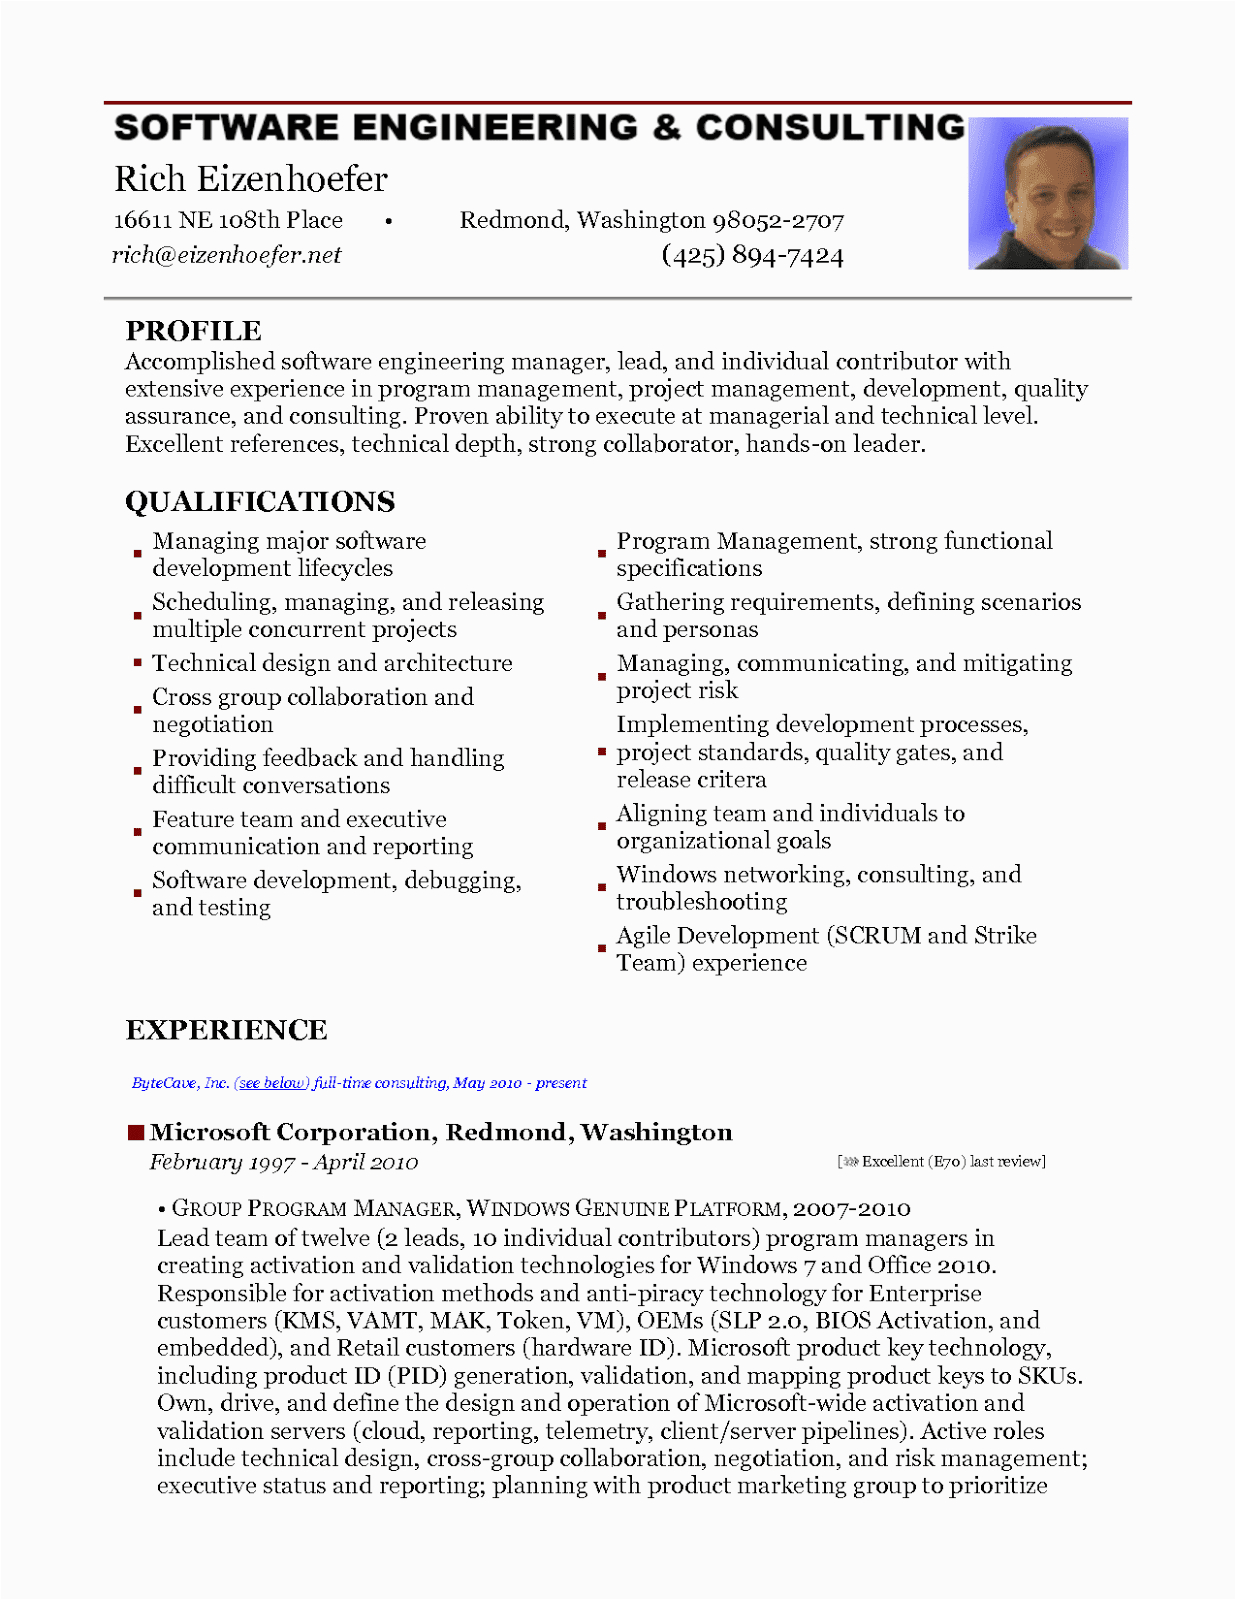 Sample Resume for software Test Engineer with 2 Years Experience 2 Years Experience Resume Scribd India